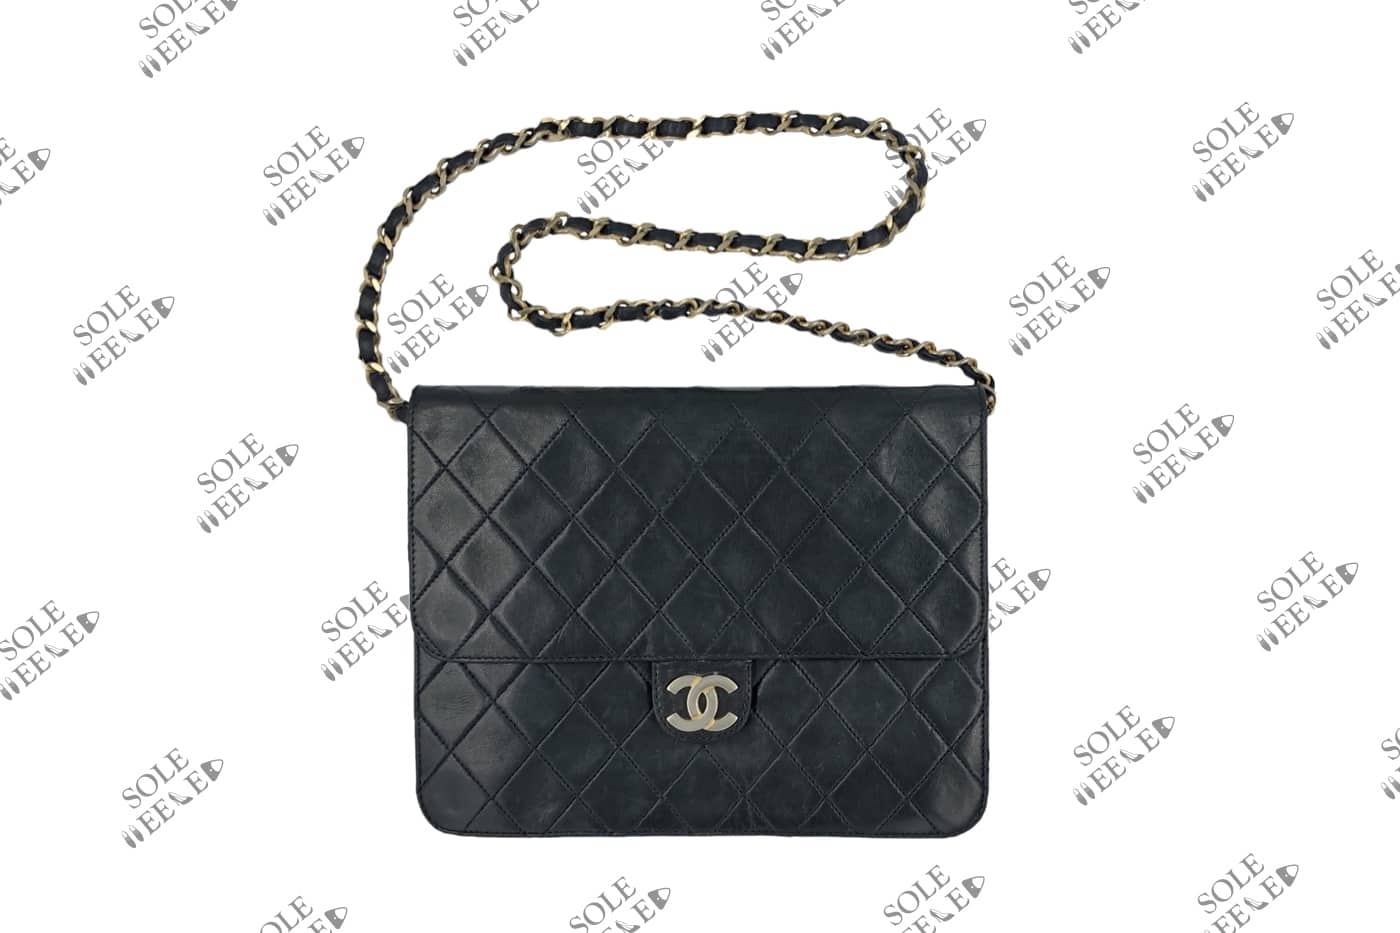 RARE 90s CHANEL Quilted Blue Demin Small Bag with Gold CC Clasp CHAN